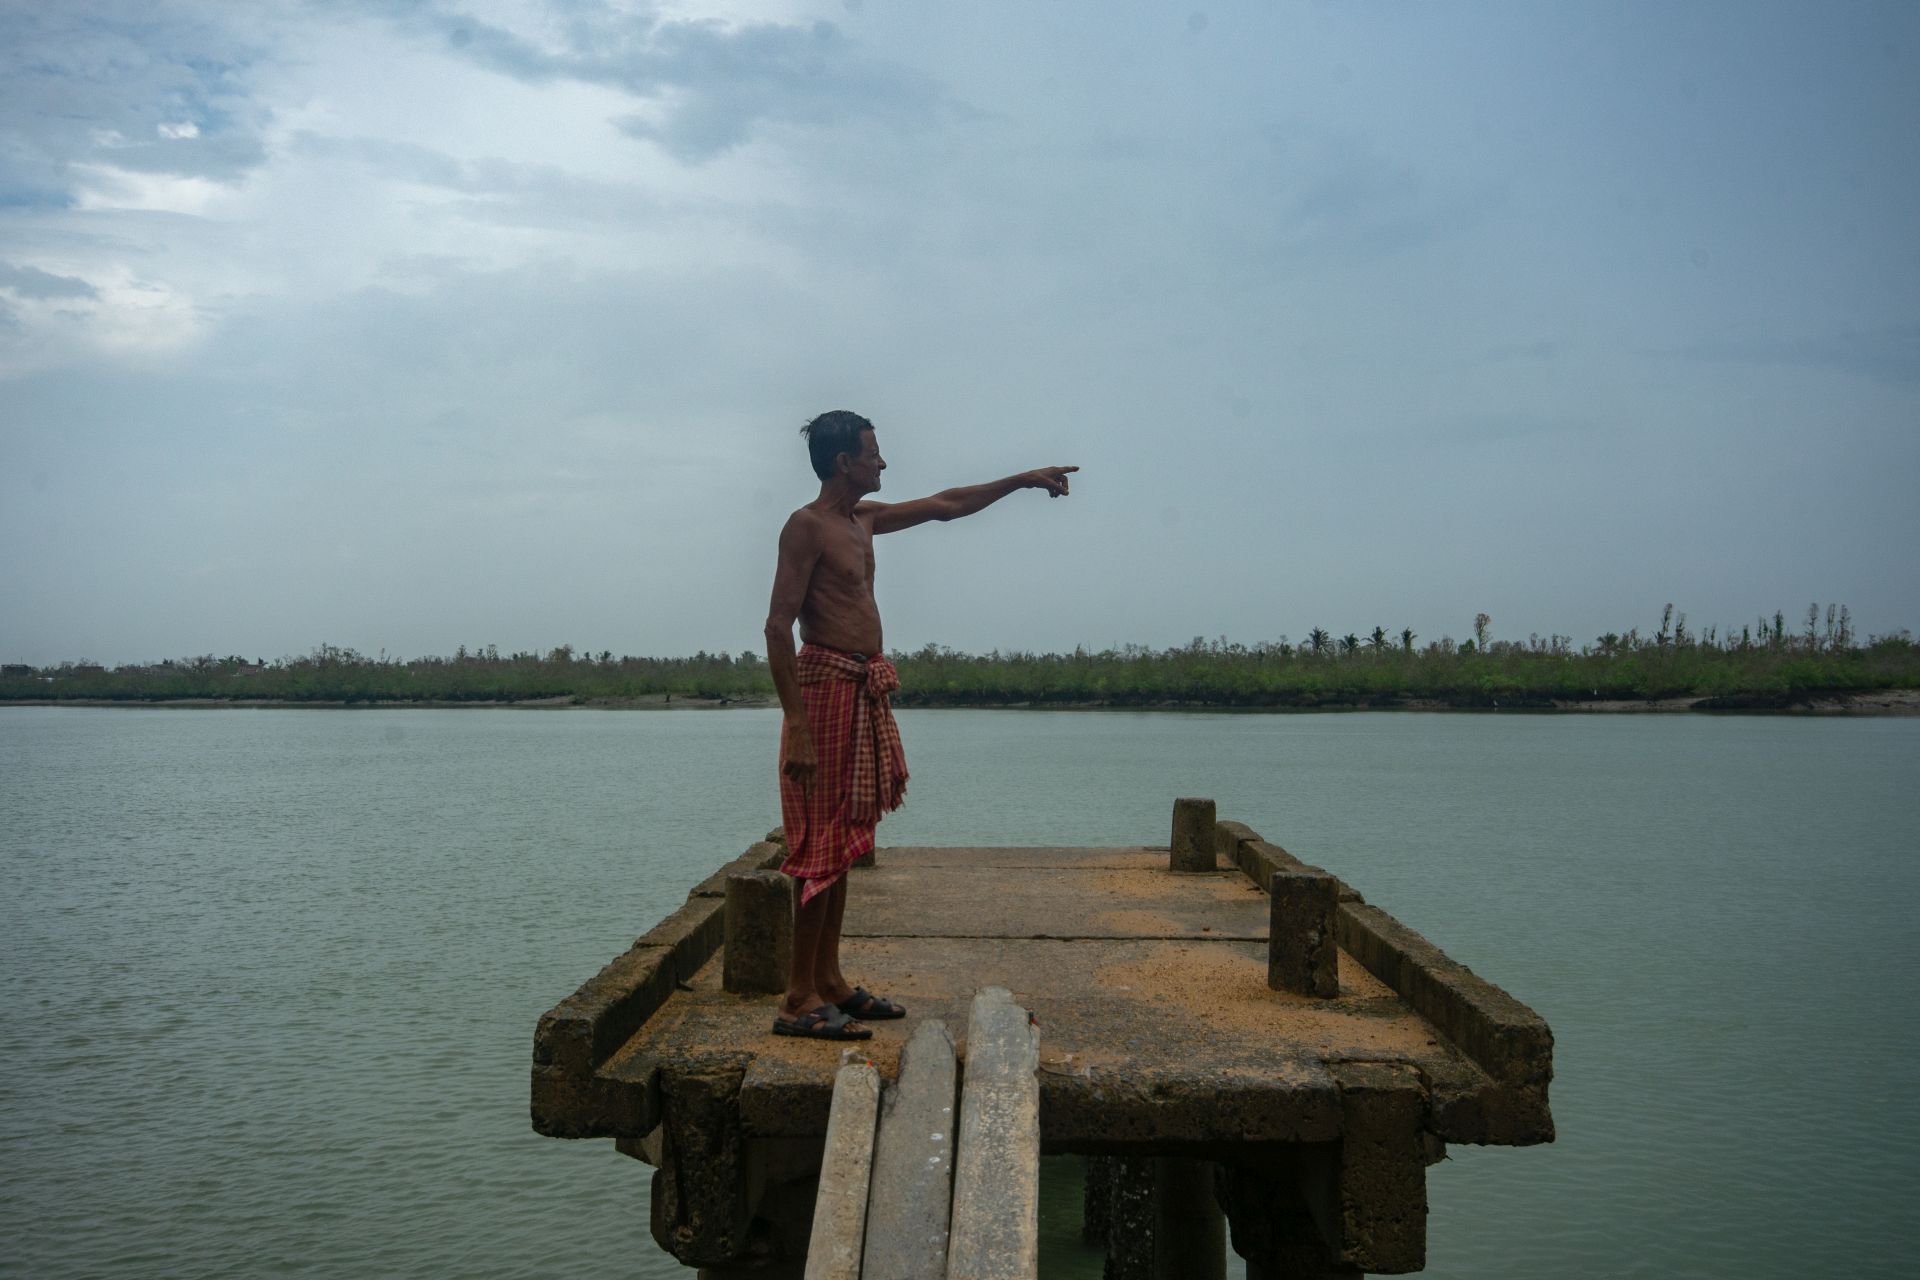 Gaur Hari Maity points at the Chaltamuniya Khal which has now turned into a river due to the rise in seawater in the recent past. (Image: WaterAid/ Subhrajit Sen)